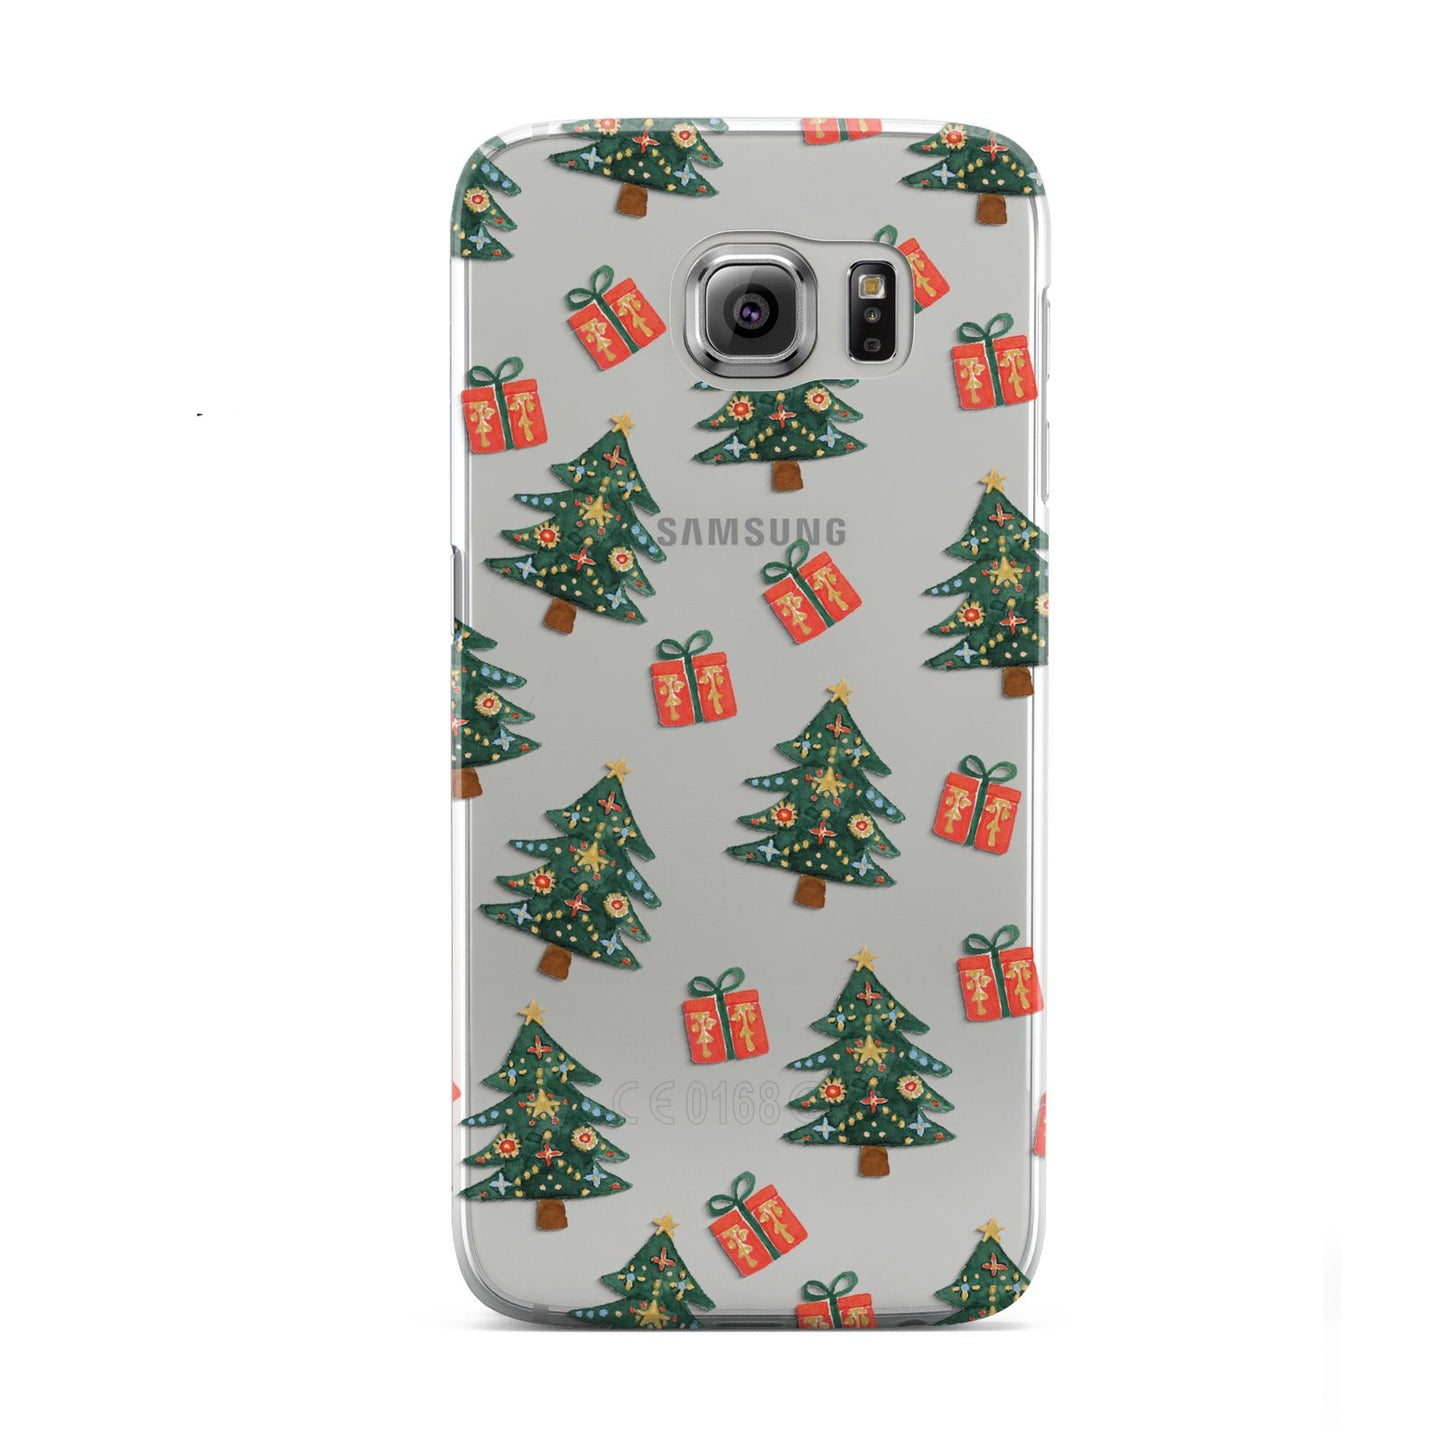 Christmas tree and presents Samsung Galaxy S6 Case